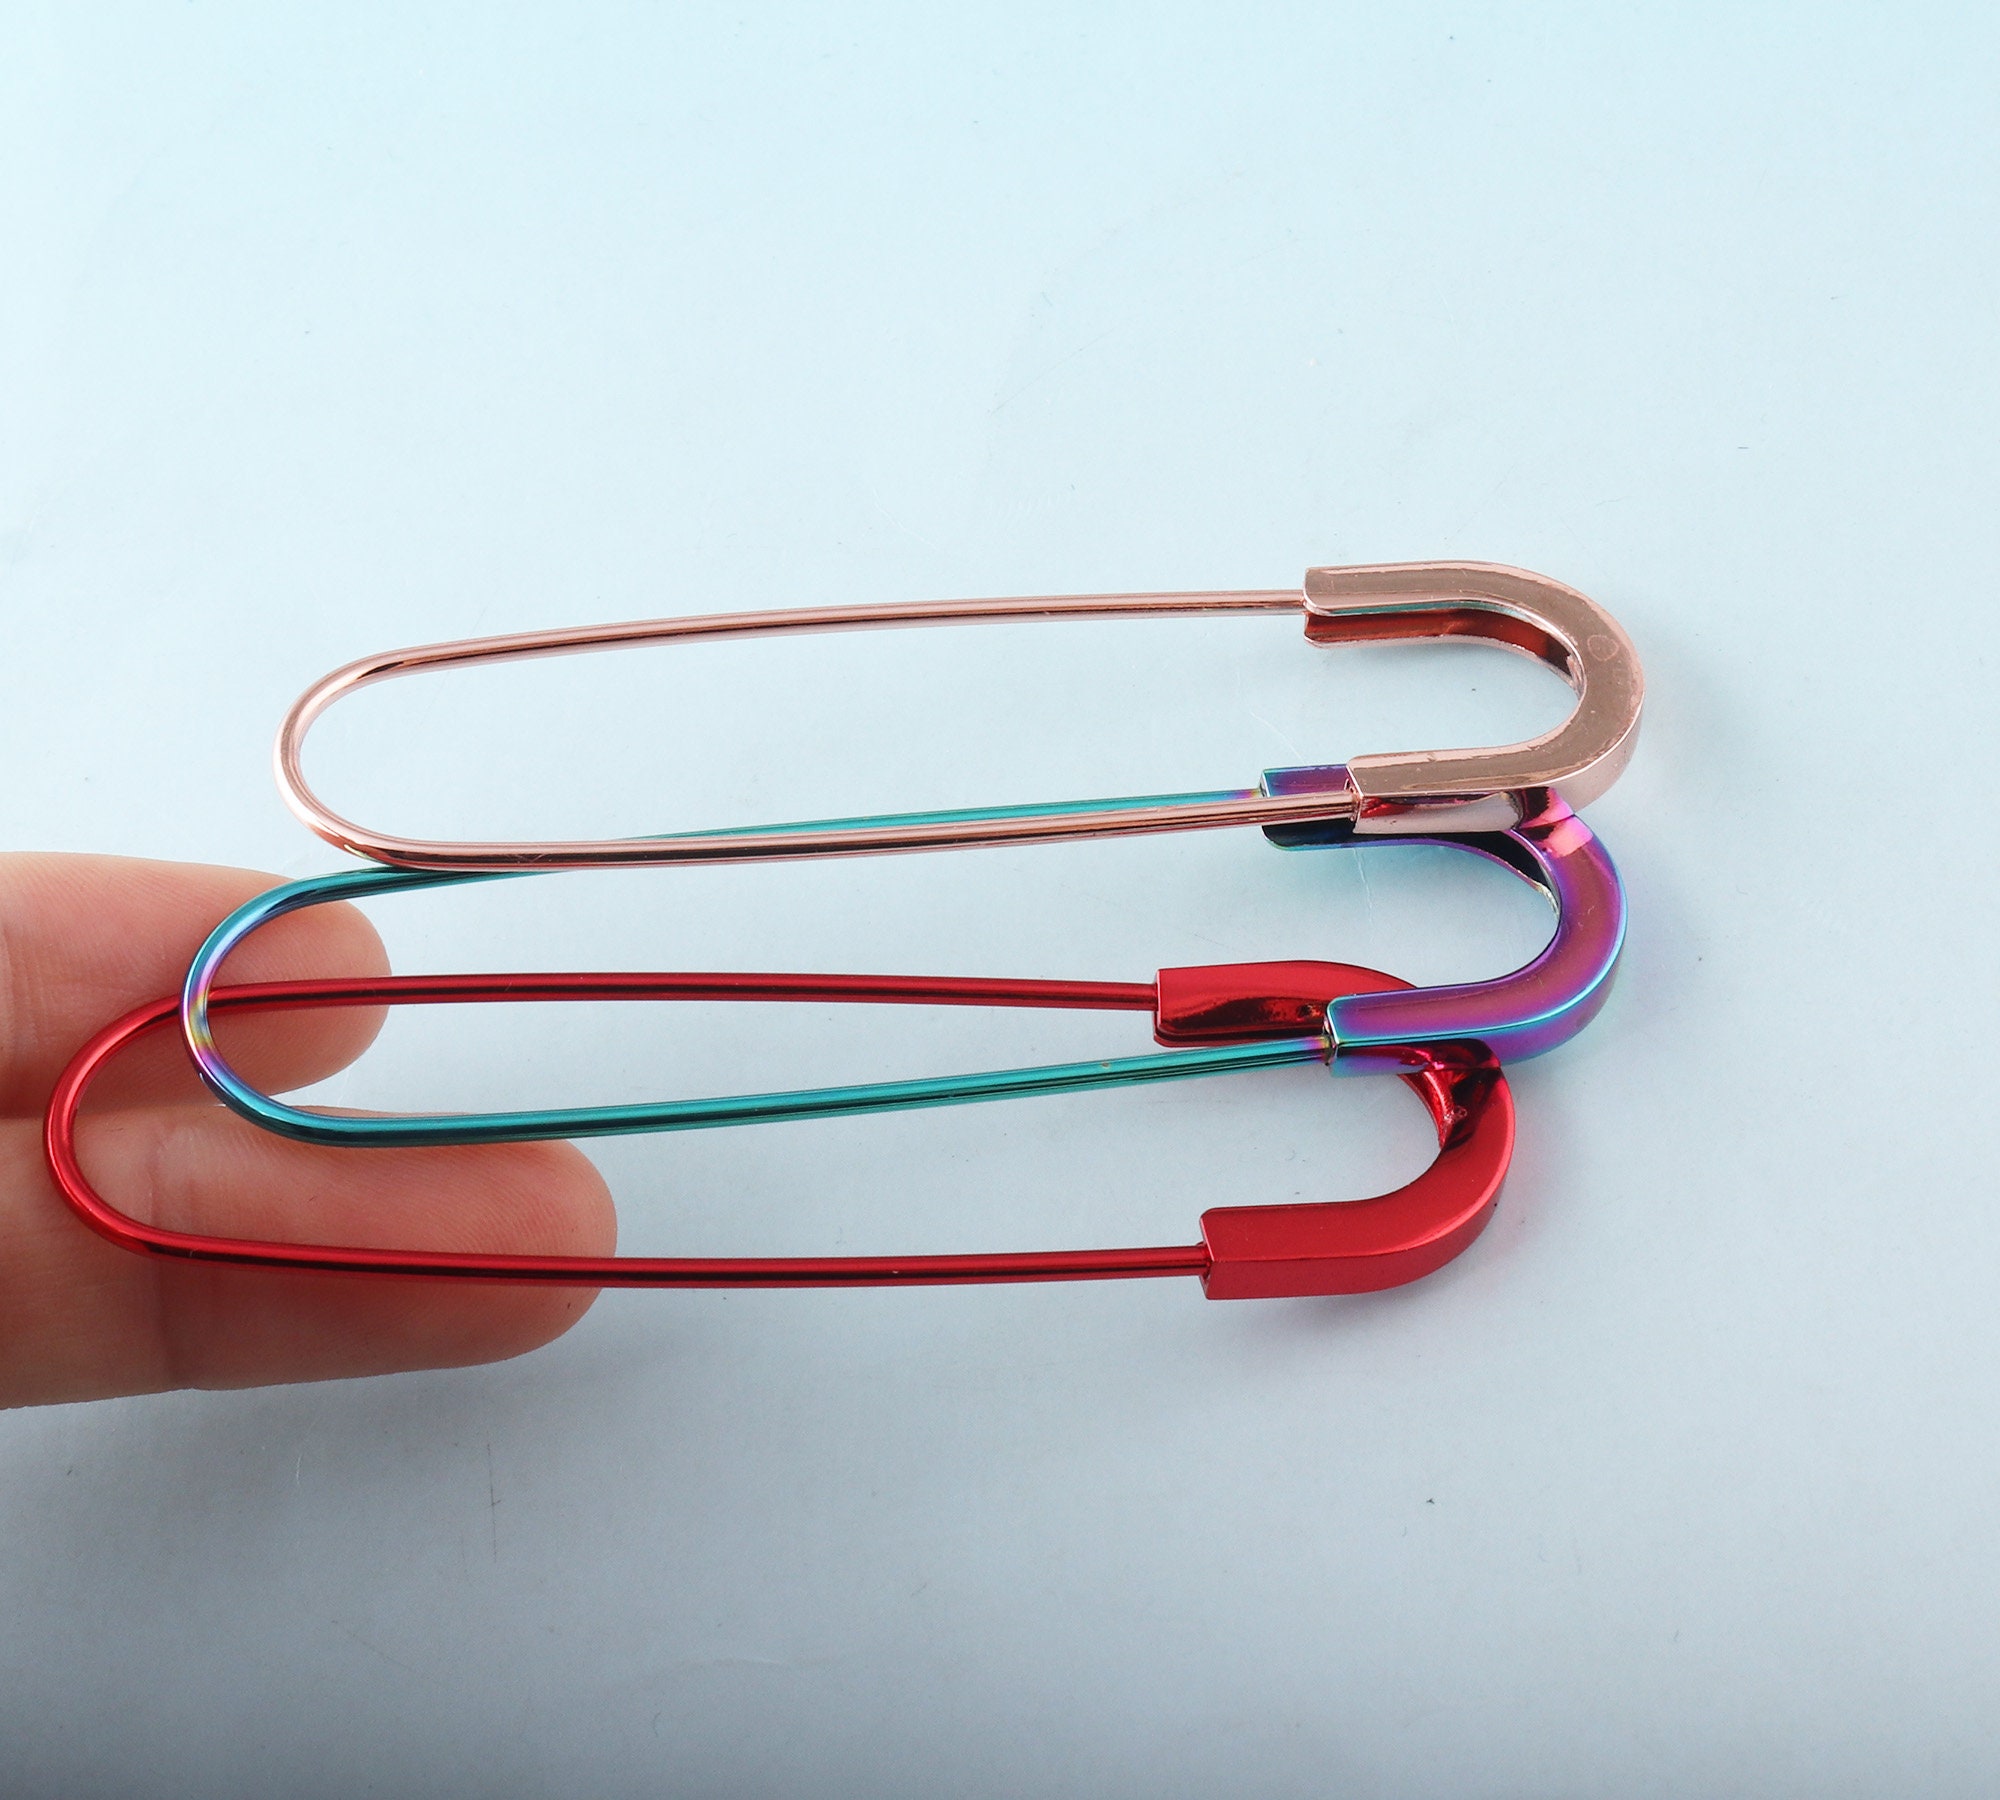 6pcs Rainbow Safety Pins, Large Safety Pin, Giant Safety Pins , Big Pins  Safety Pins,metal Pins Brooch Safety Pins ,sewing Safety Pins 